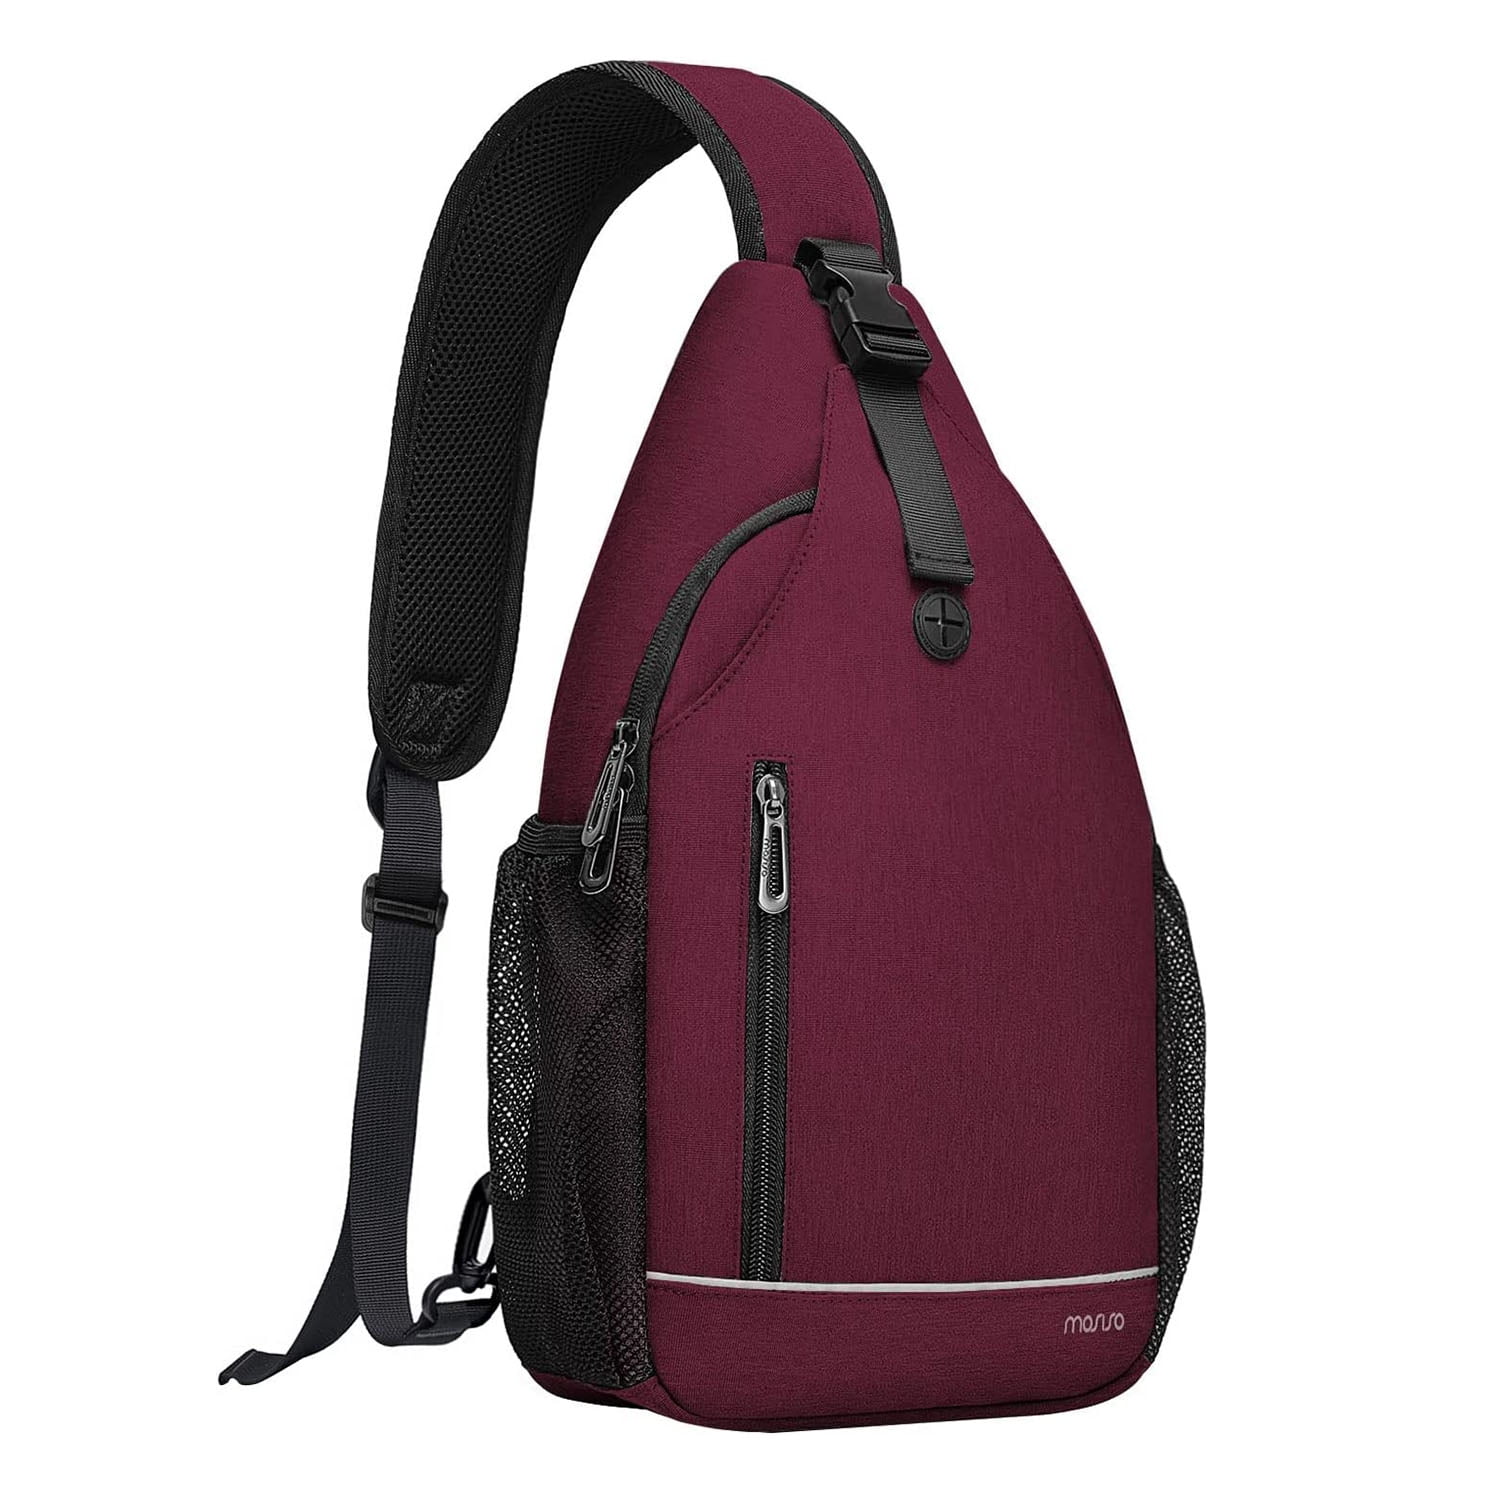 Mosiso Sling Backpack, Multipurpose Crossbody Shoulder Bag with Front  Buckle Pouch&Reflective Strip For Hiking,Travel,For Women Men,Wine Red 